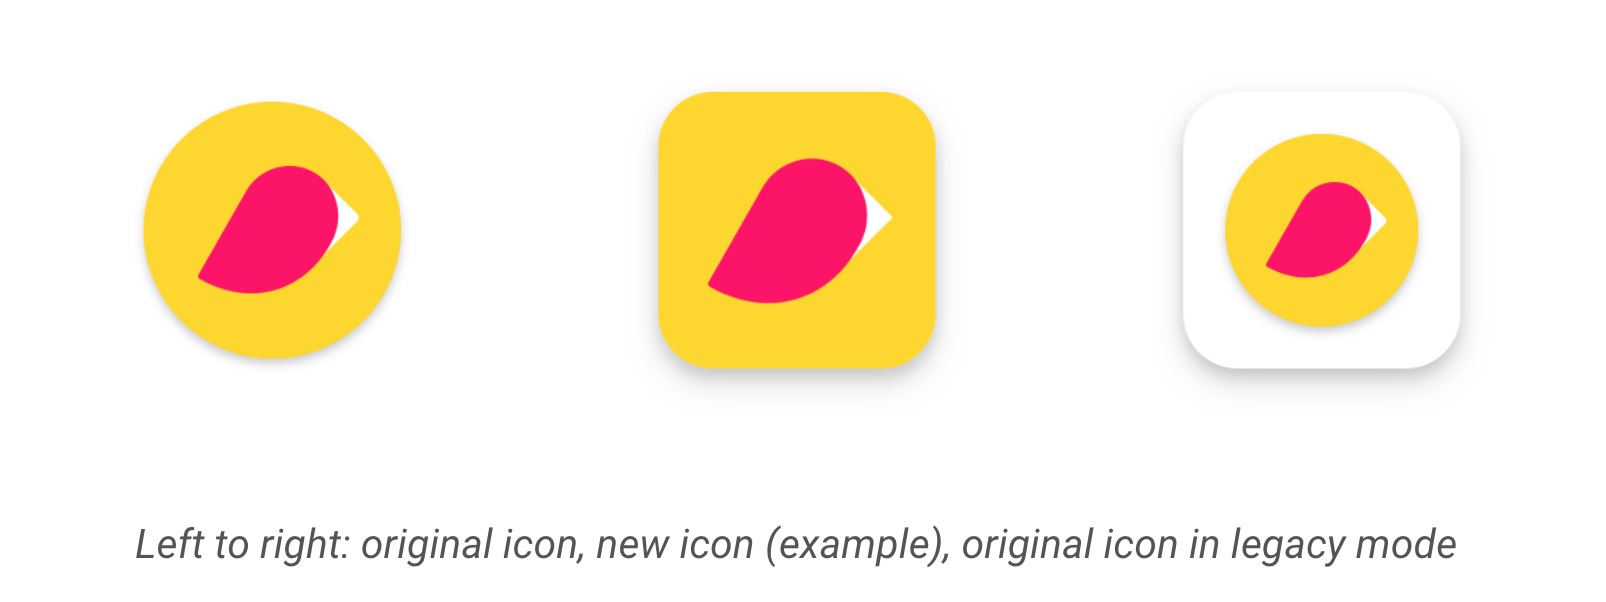 Google Play Store squircle icons